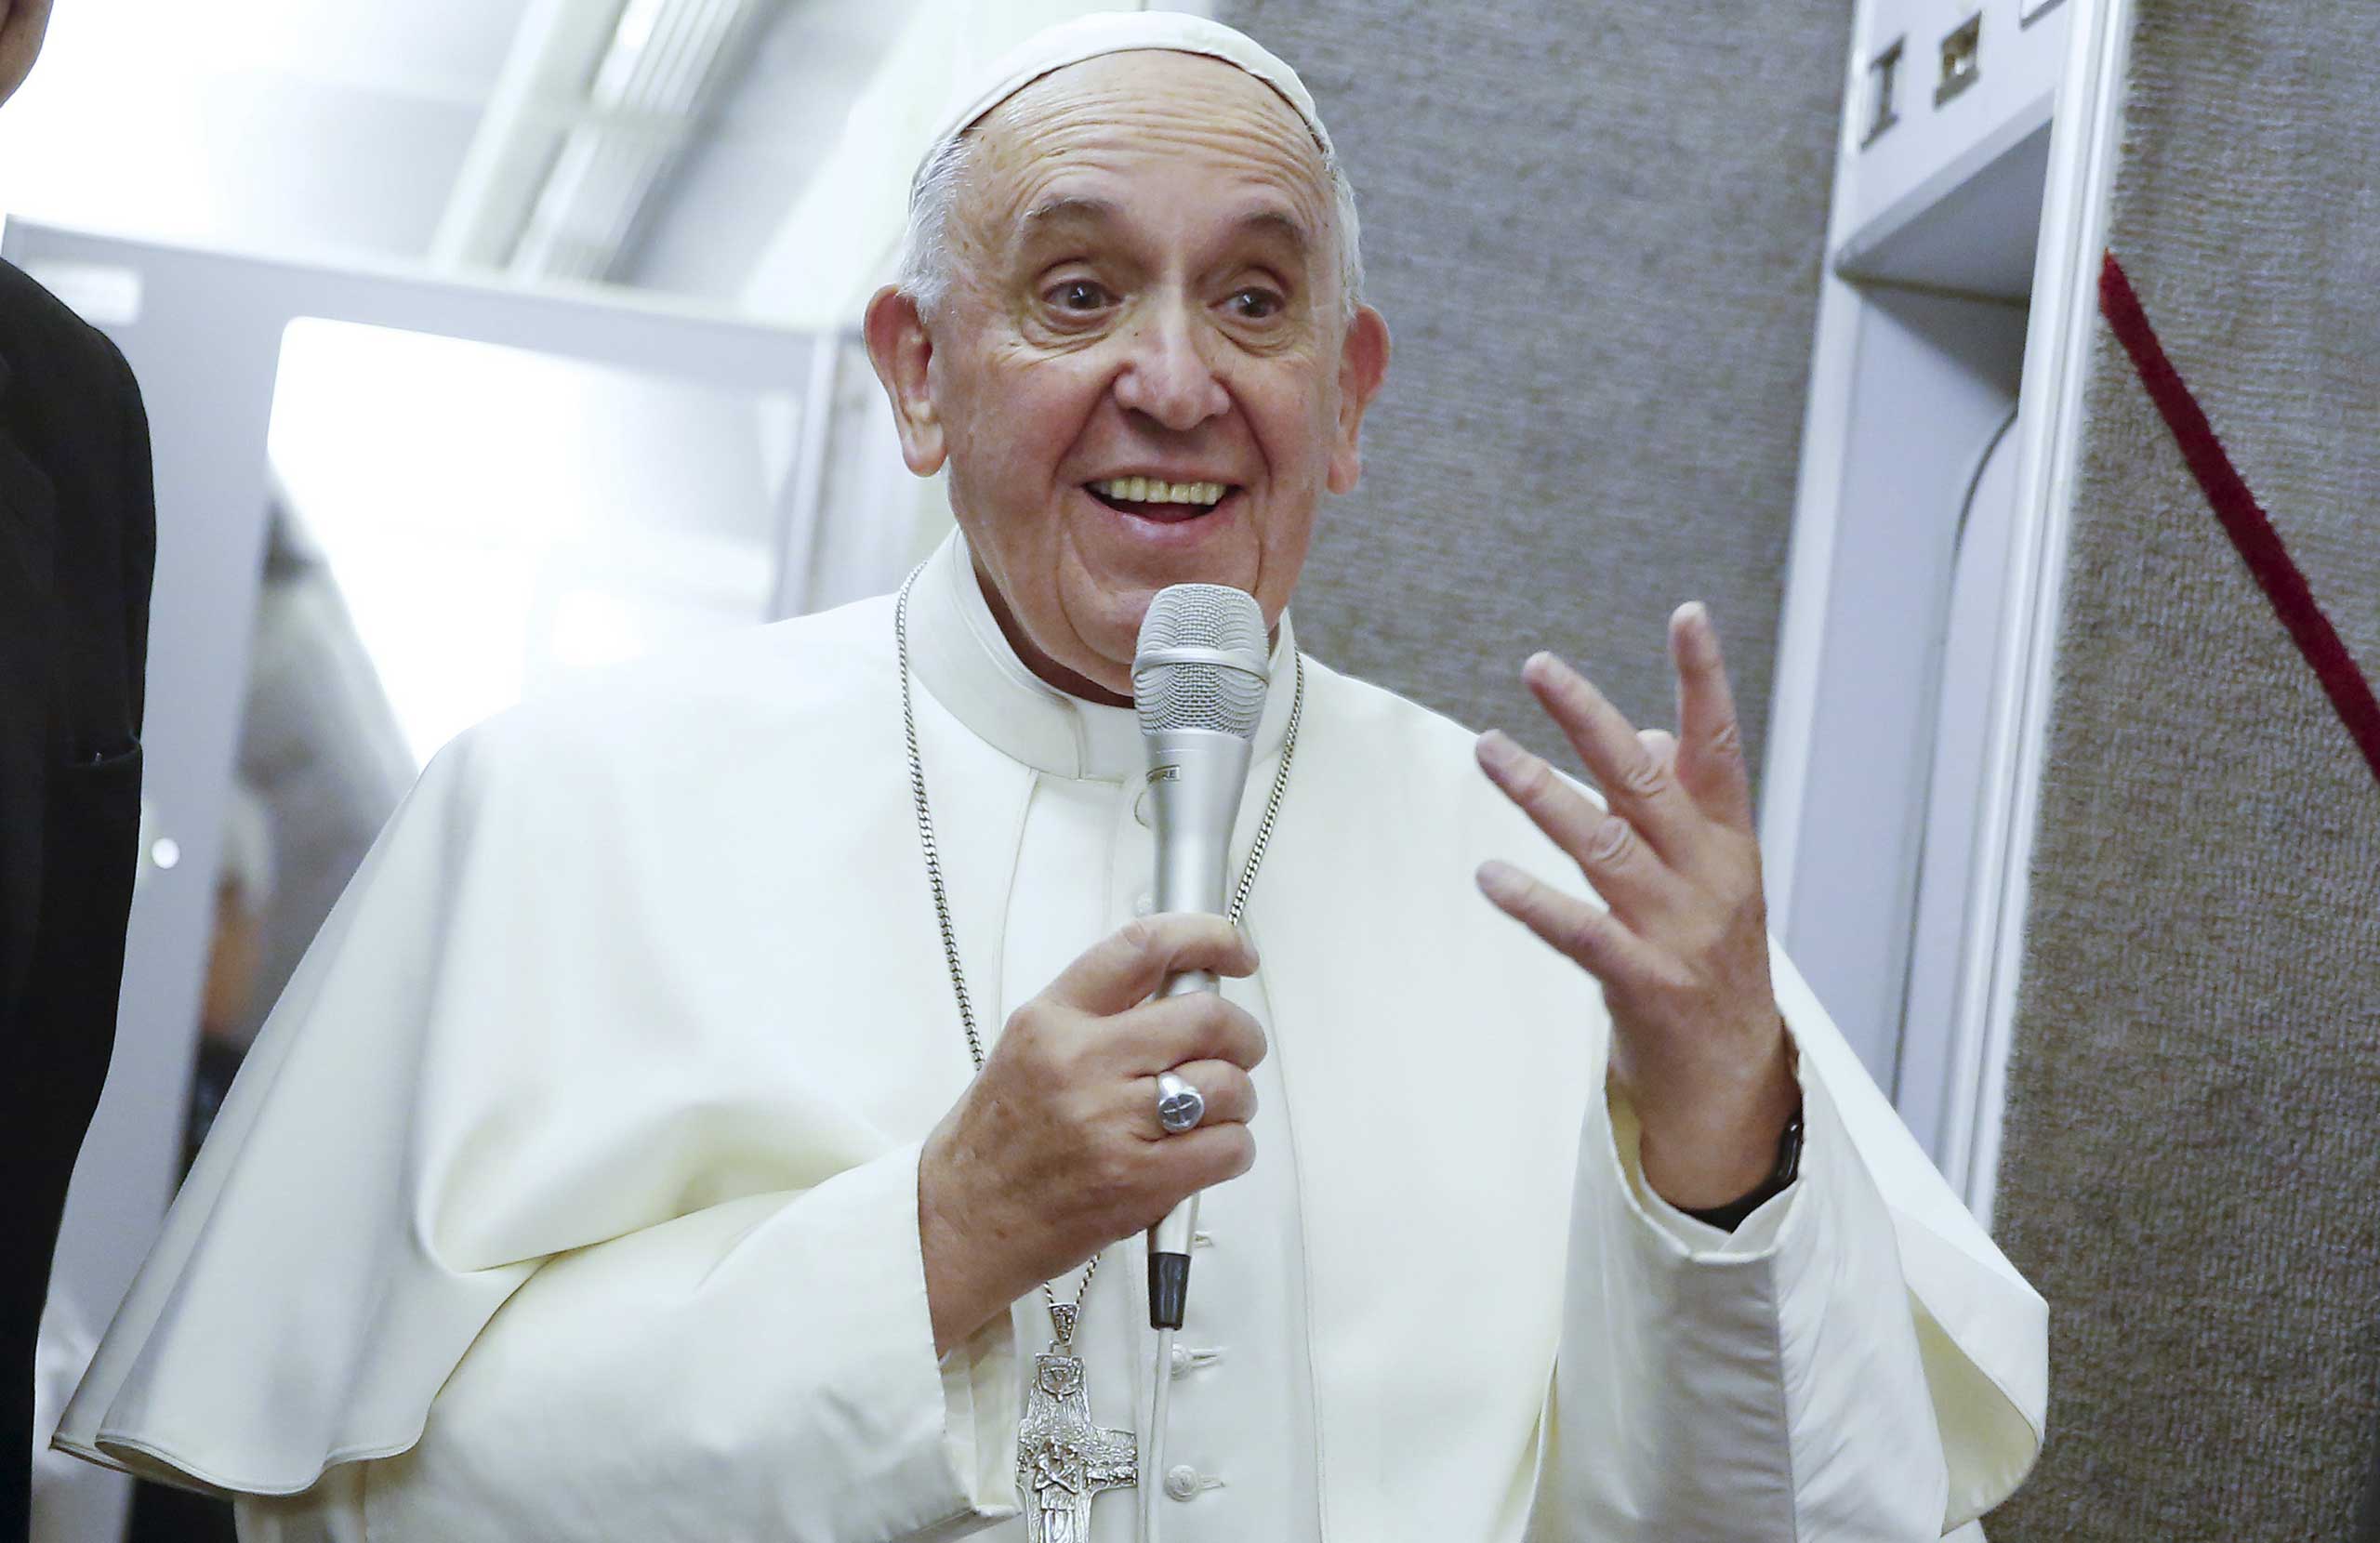 Pope Francis talks aboard the papal plane while en route to Italy